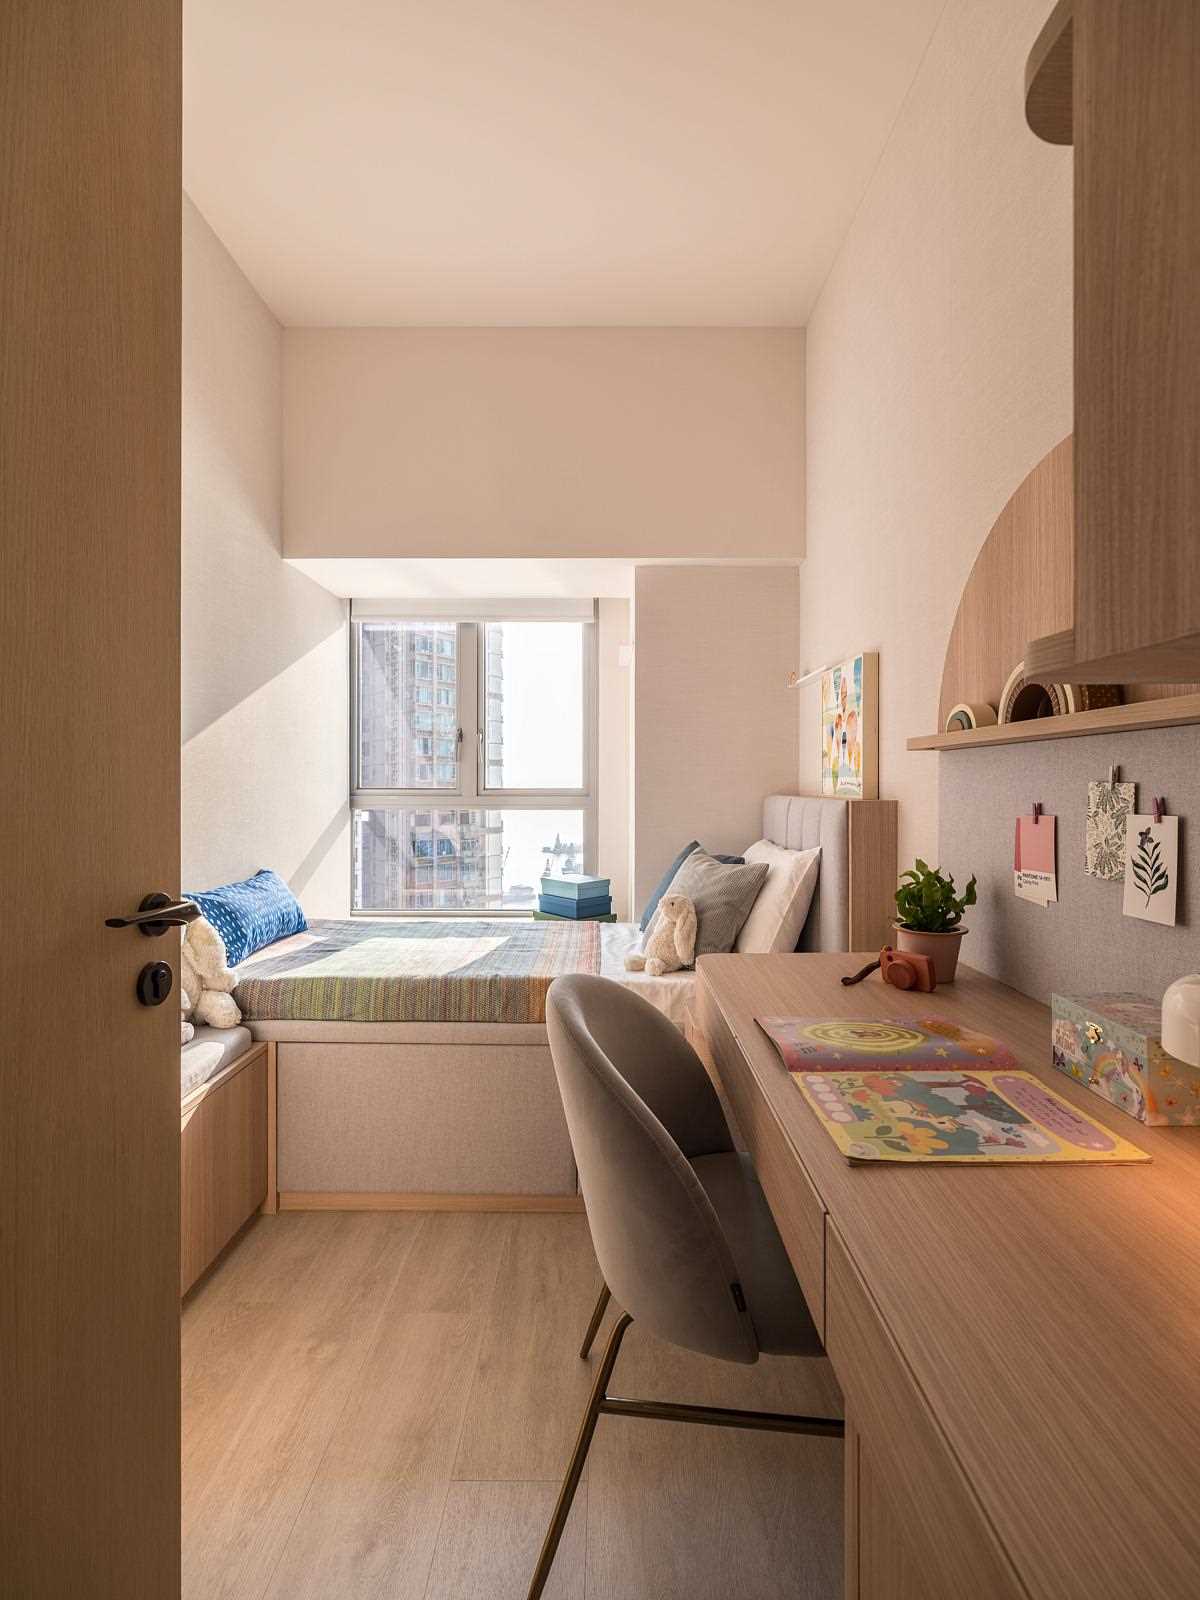 A modern and small kids room with a built-in desk.